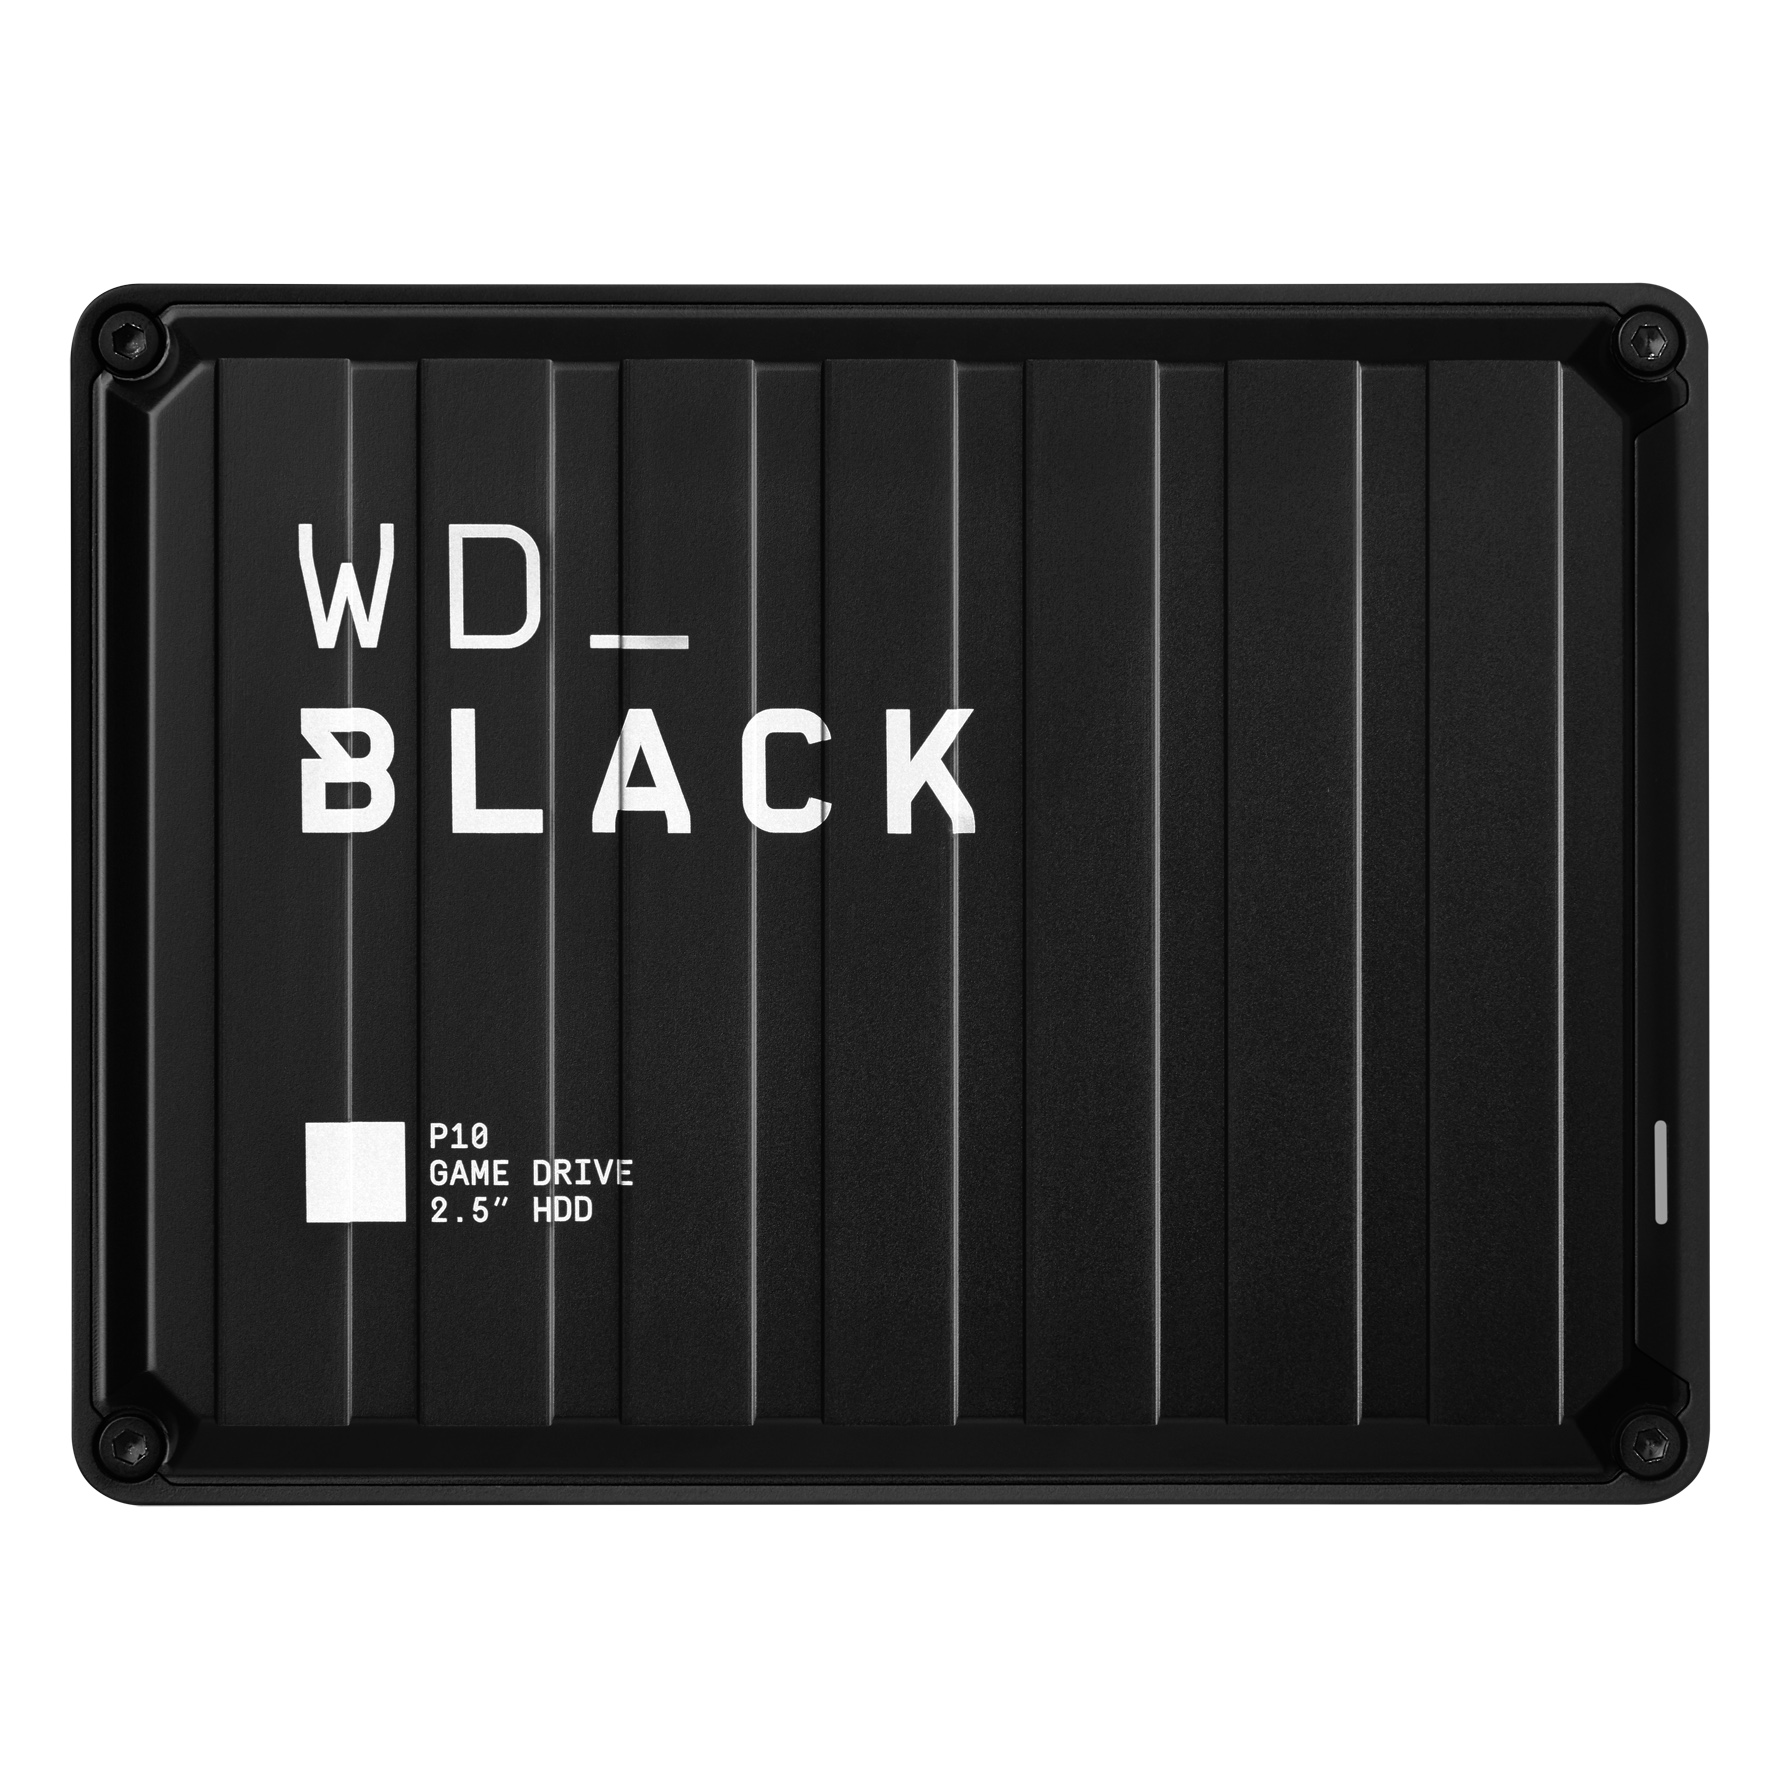 WD_Black P10 front facing